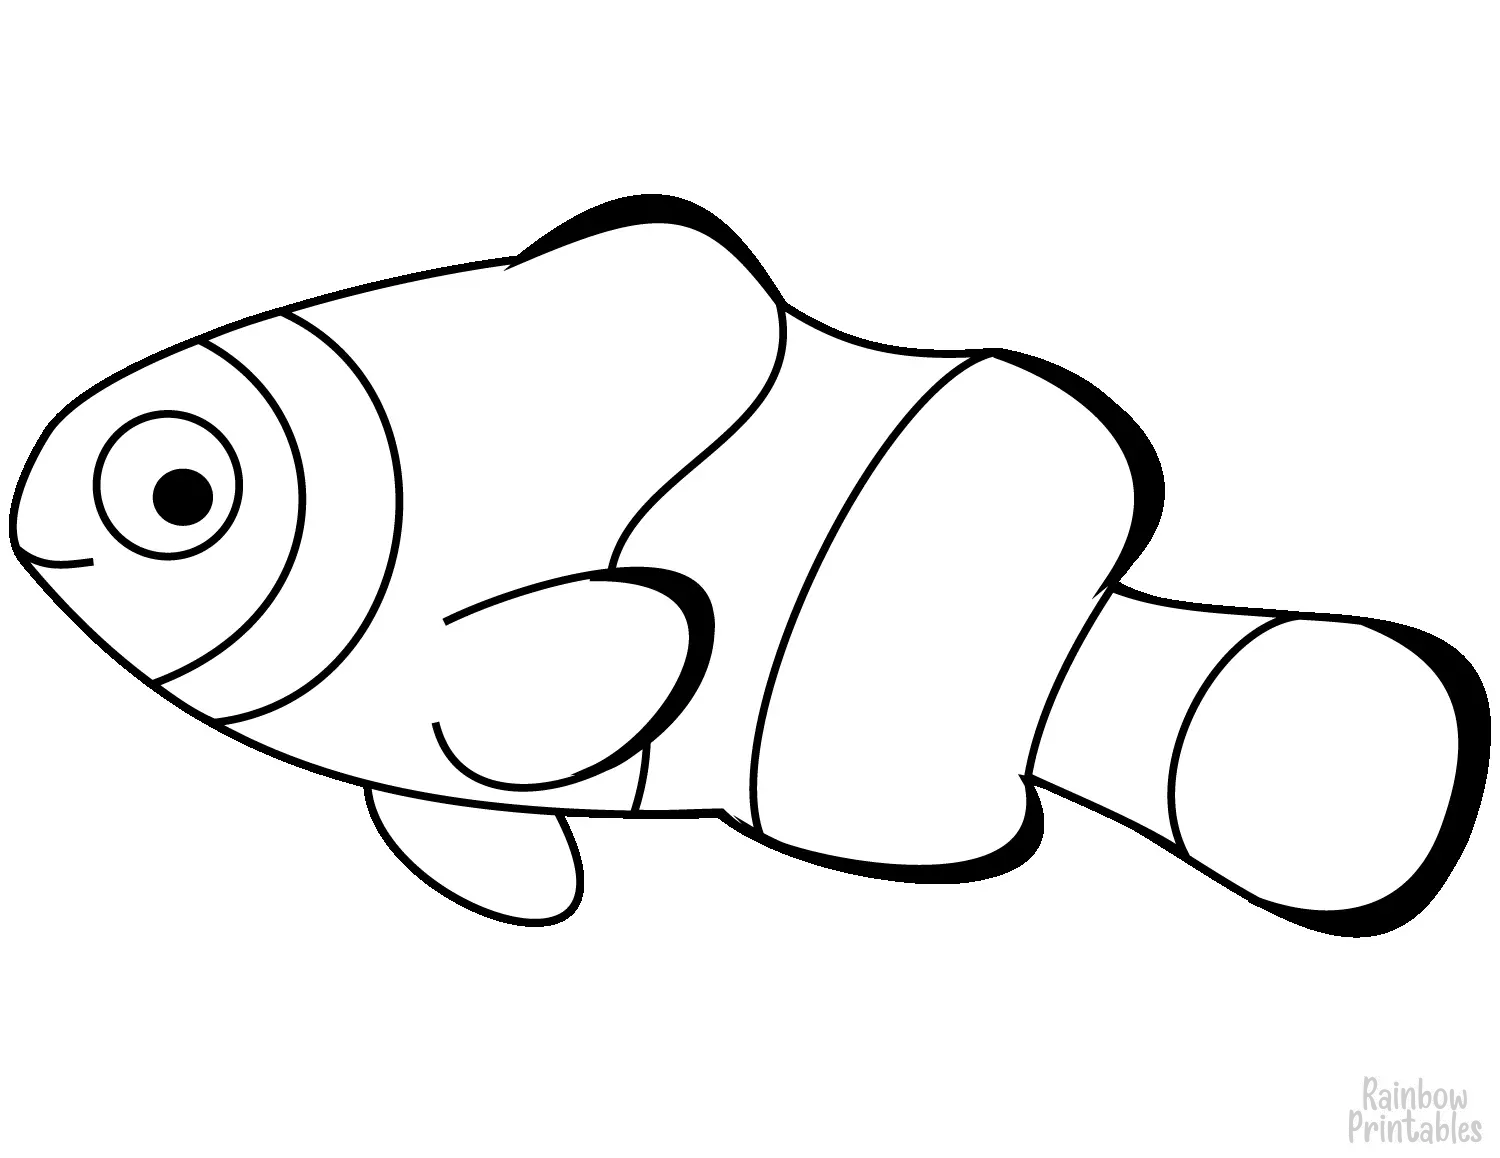 SIMPLE-EASY-line-drawings-ANEMONE-FISH-cartoon-coloring-page-for-kids